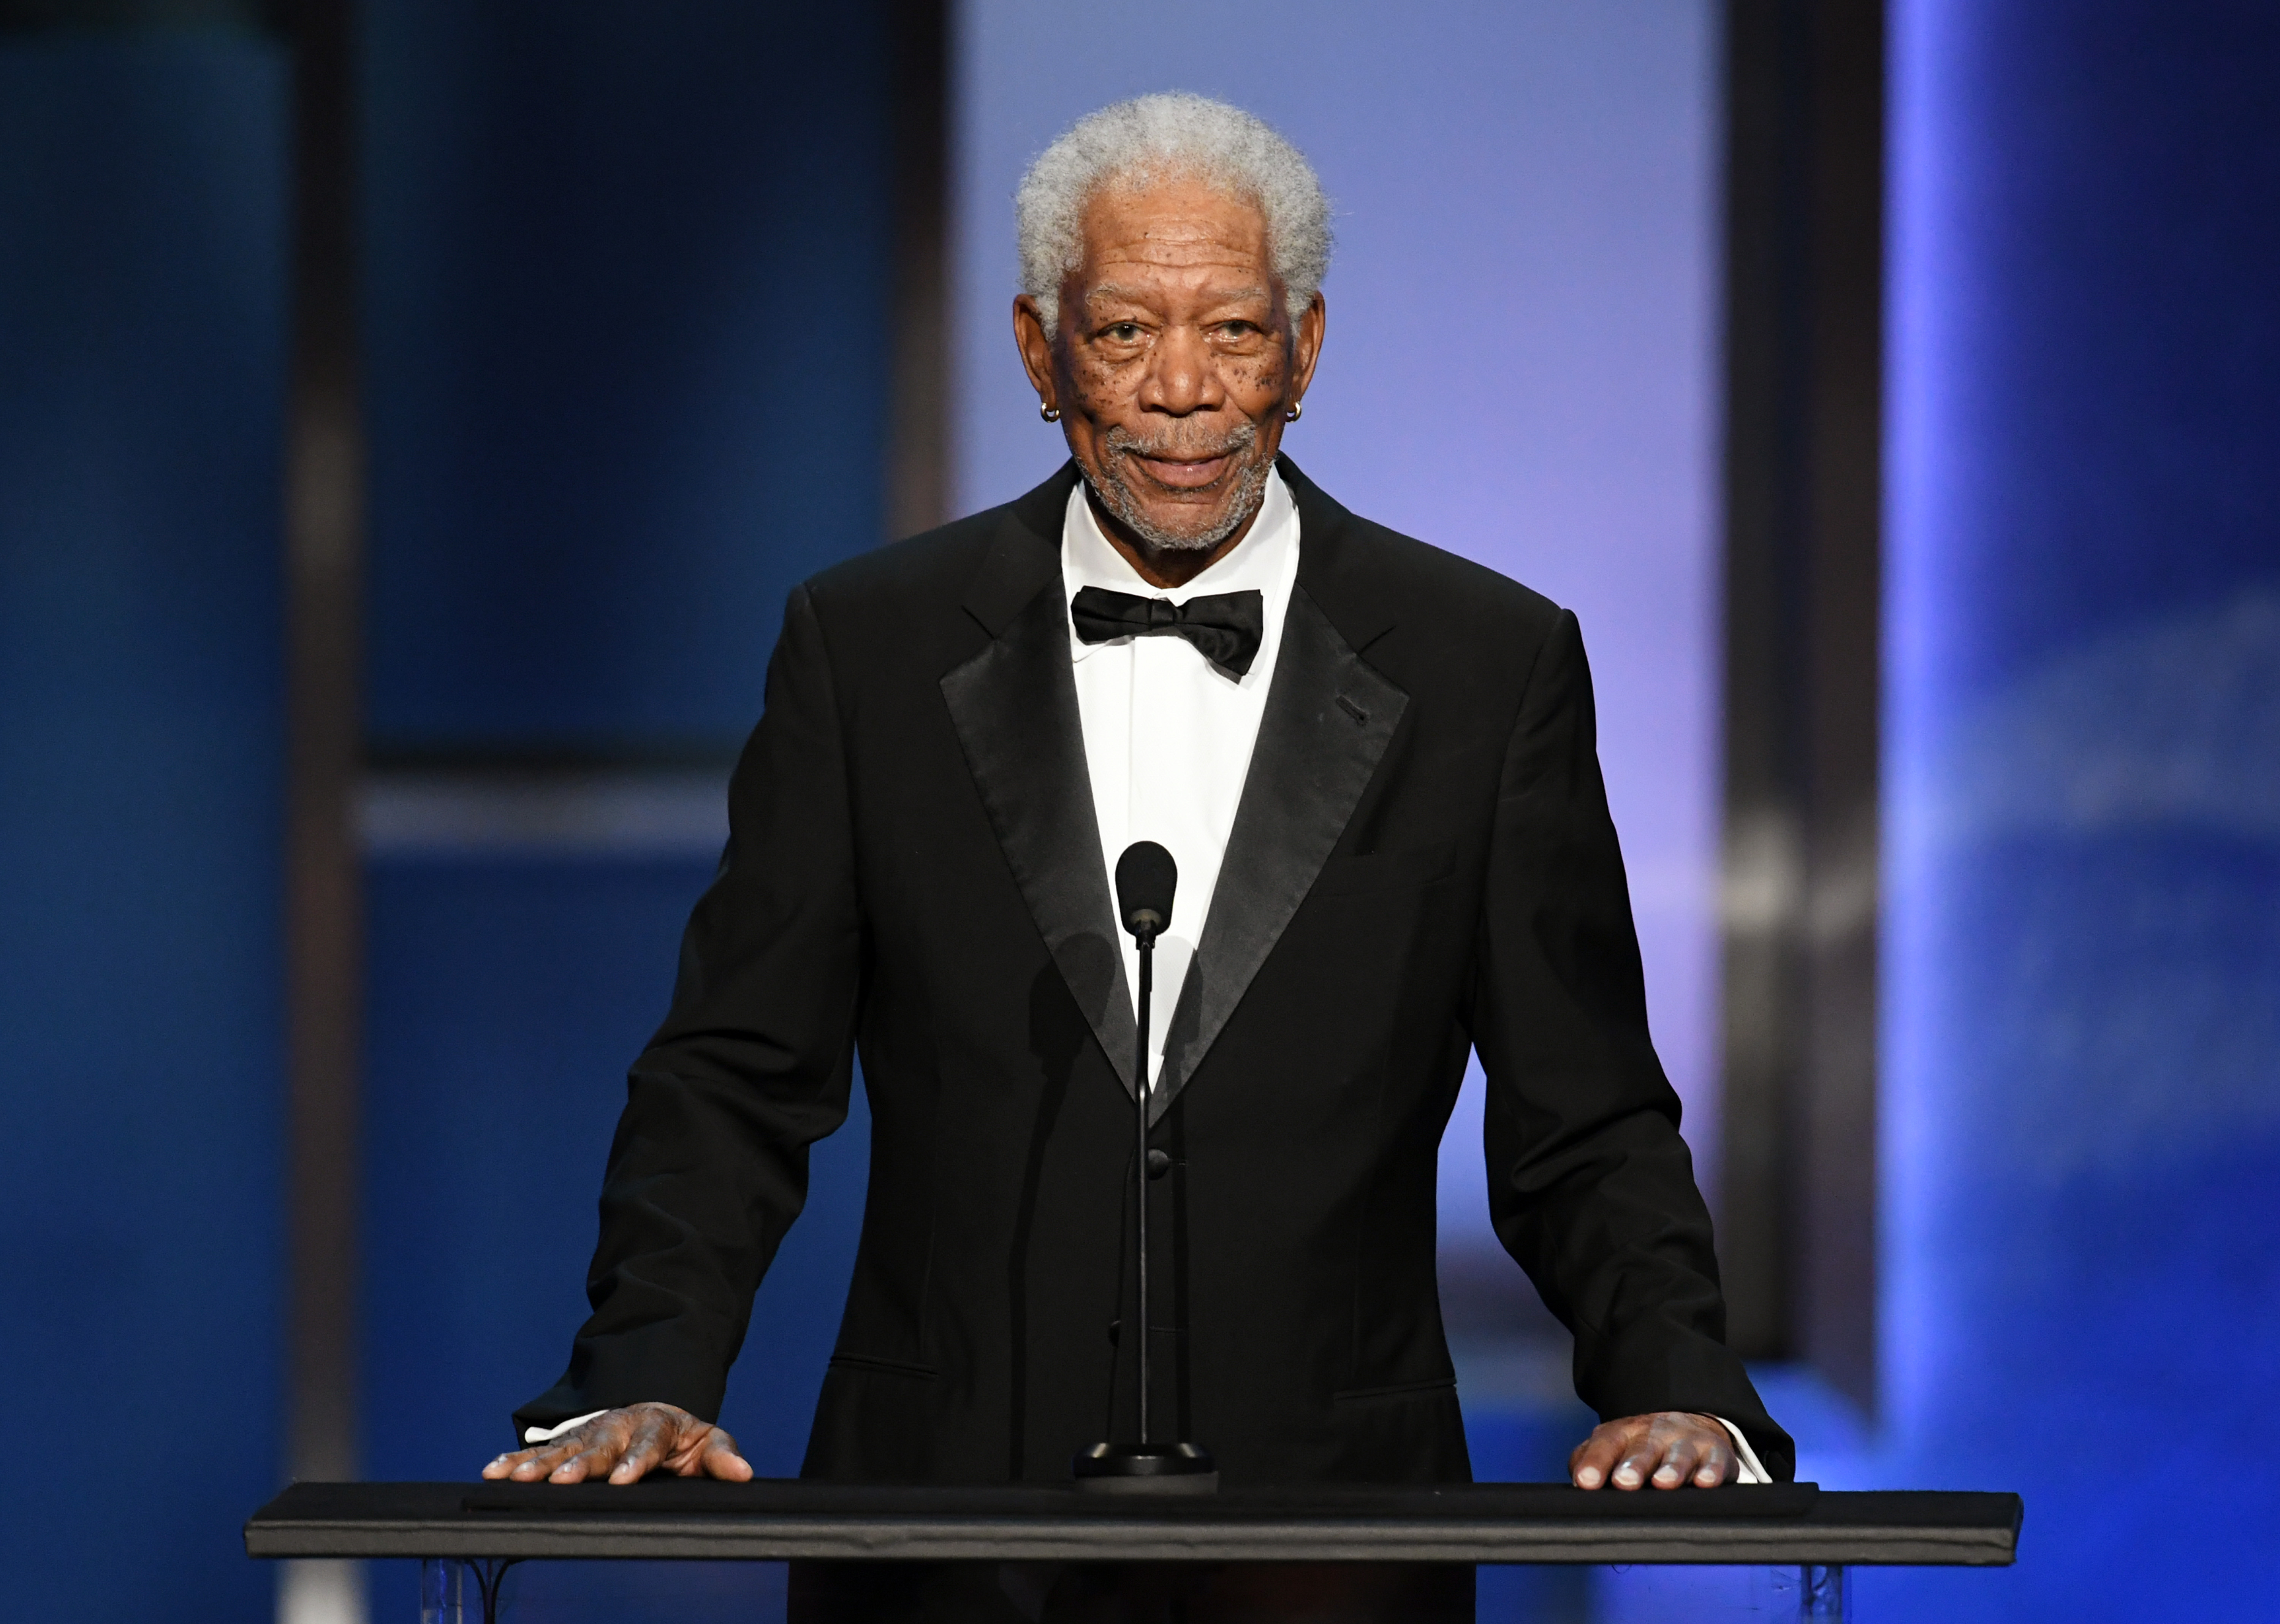 Morgan Freeman at the 47th AFI Life Achievement Award Honoring Denzel Washington in 2019 | Source: Getty Images